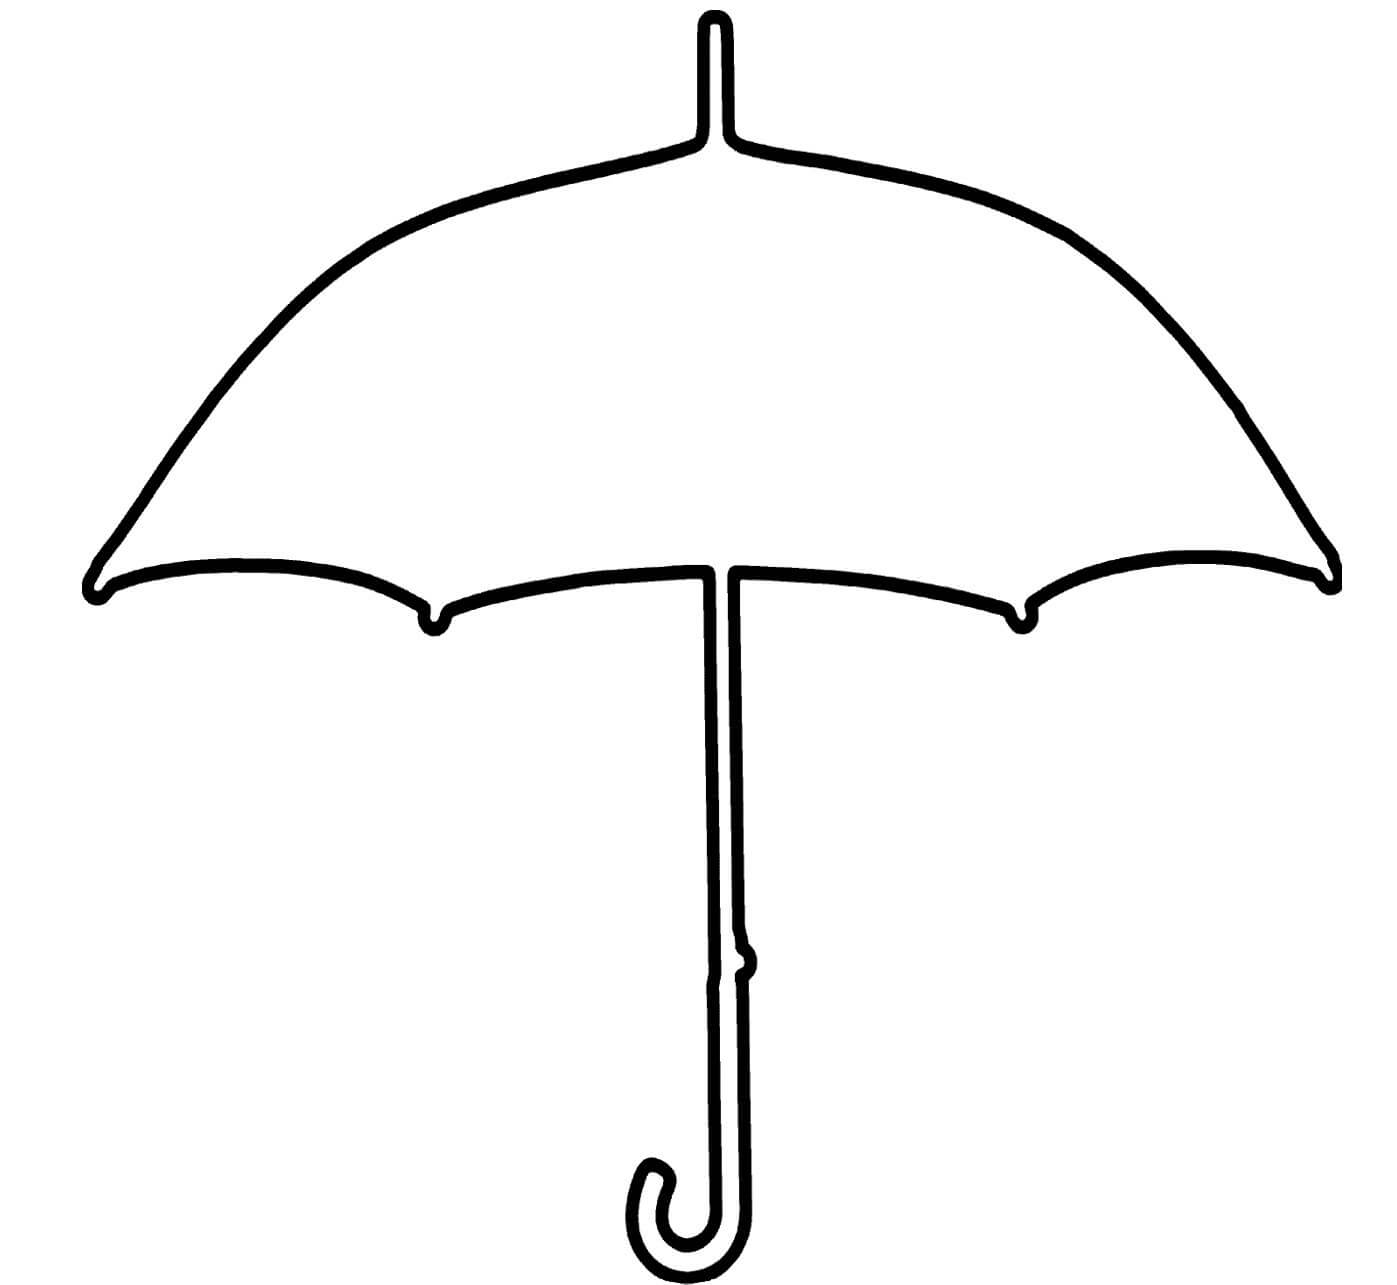 Umbrella Day Coloring Pages : Umbrella Coloring Template For Blank Umbrella Template